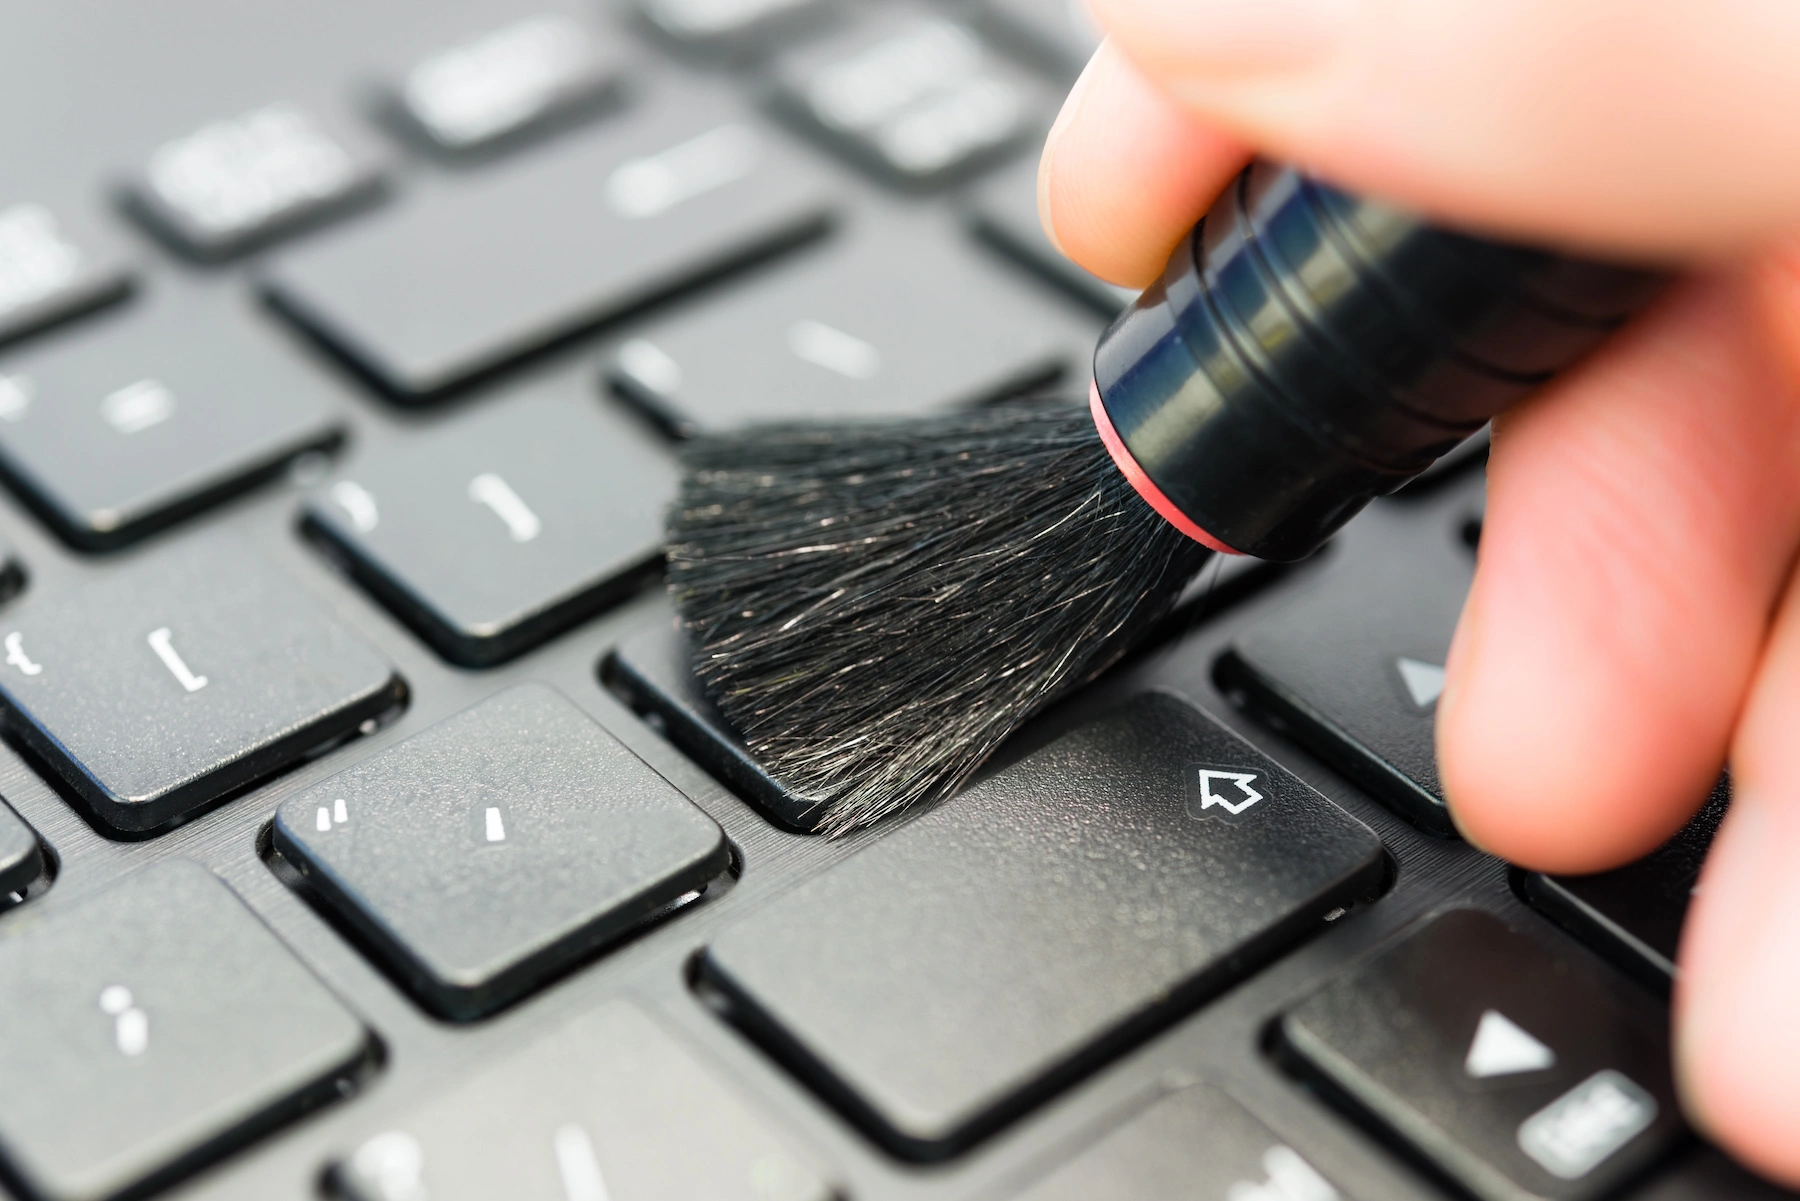 Remove filth from the laptop's keyboard keys with a keyboard brush